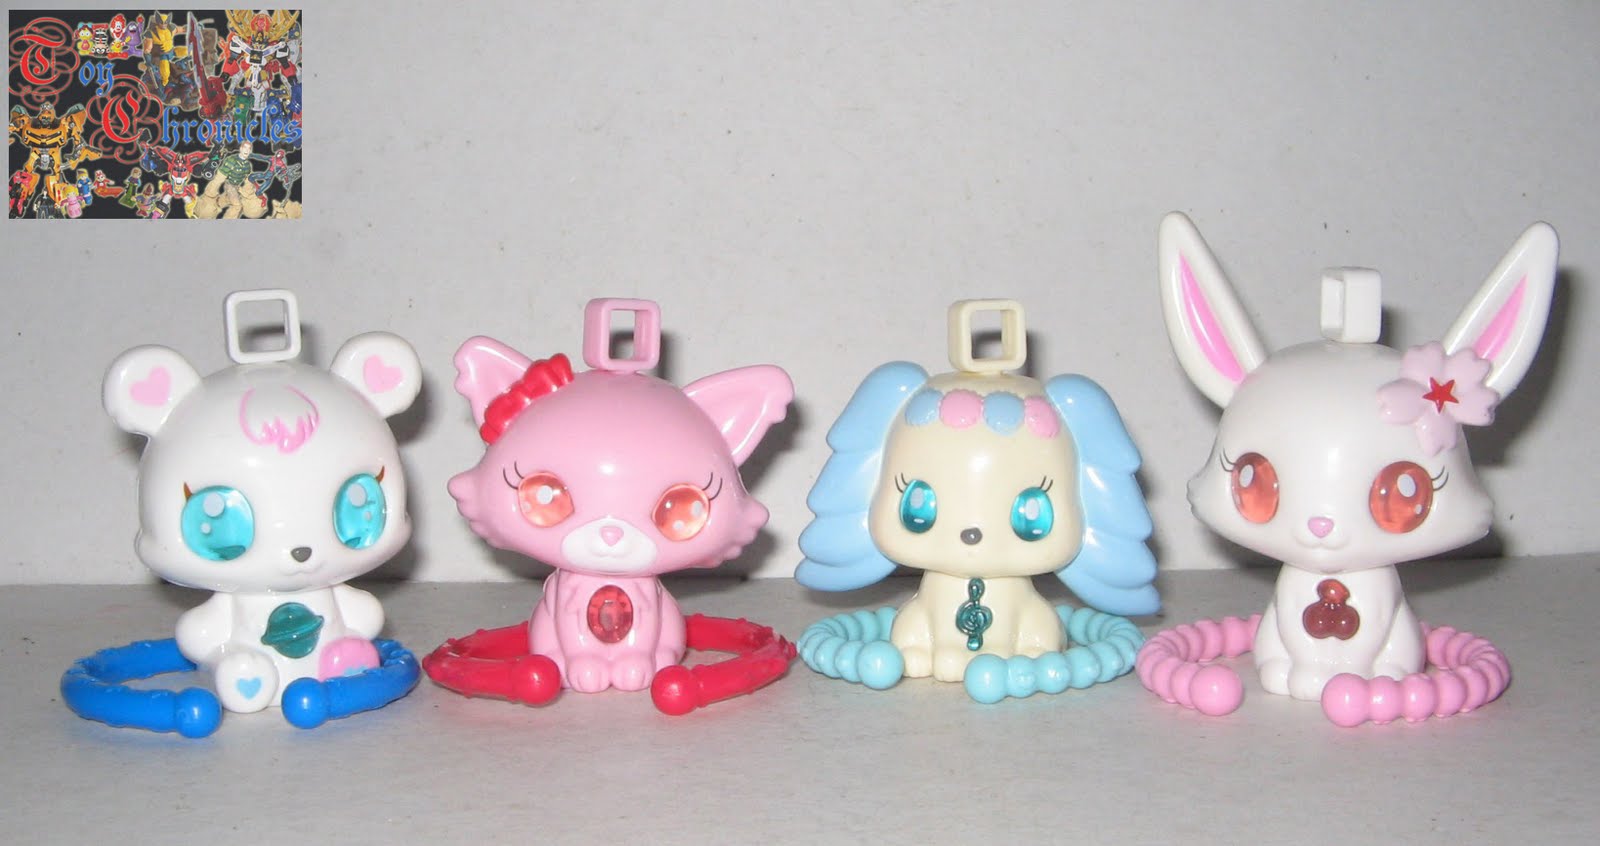 These toys are from the "Jewel Pets". 